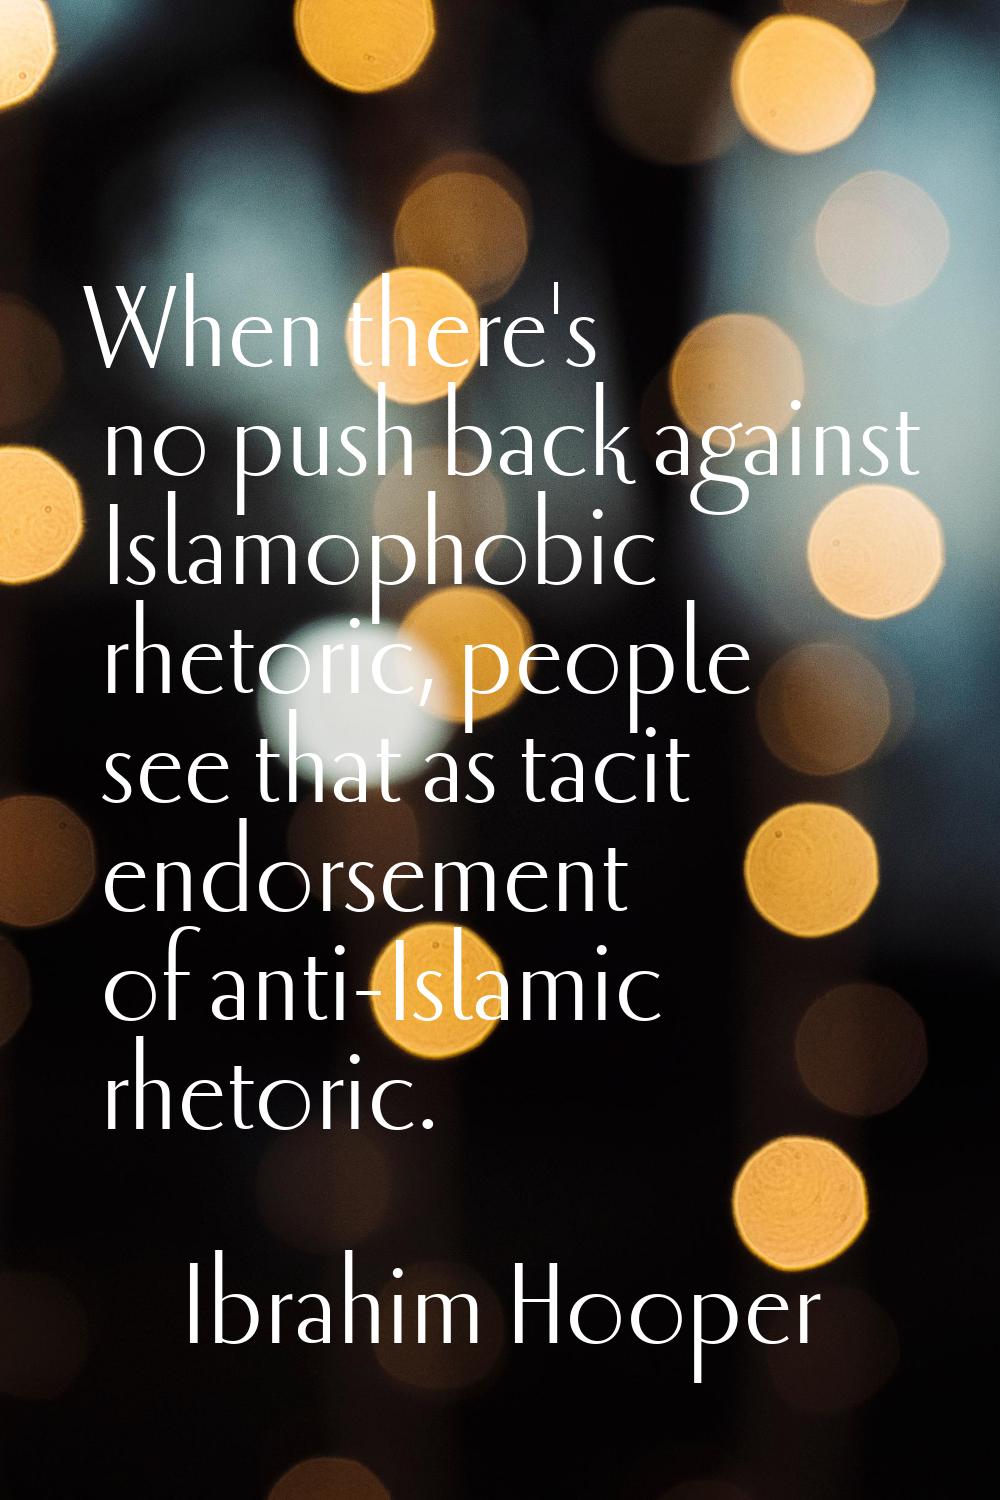 When there's no push back against Islamophobic rhetoric, people see that as tacit endorsement of an